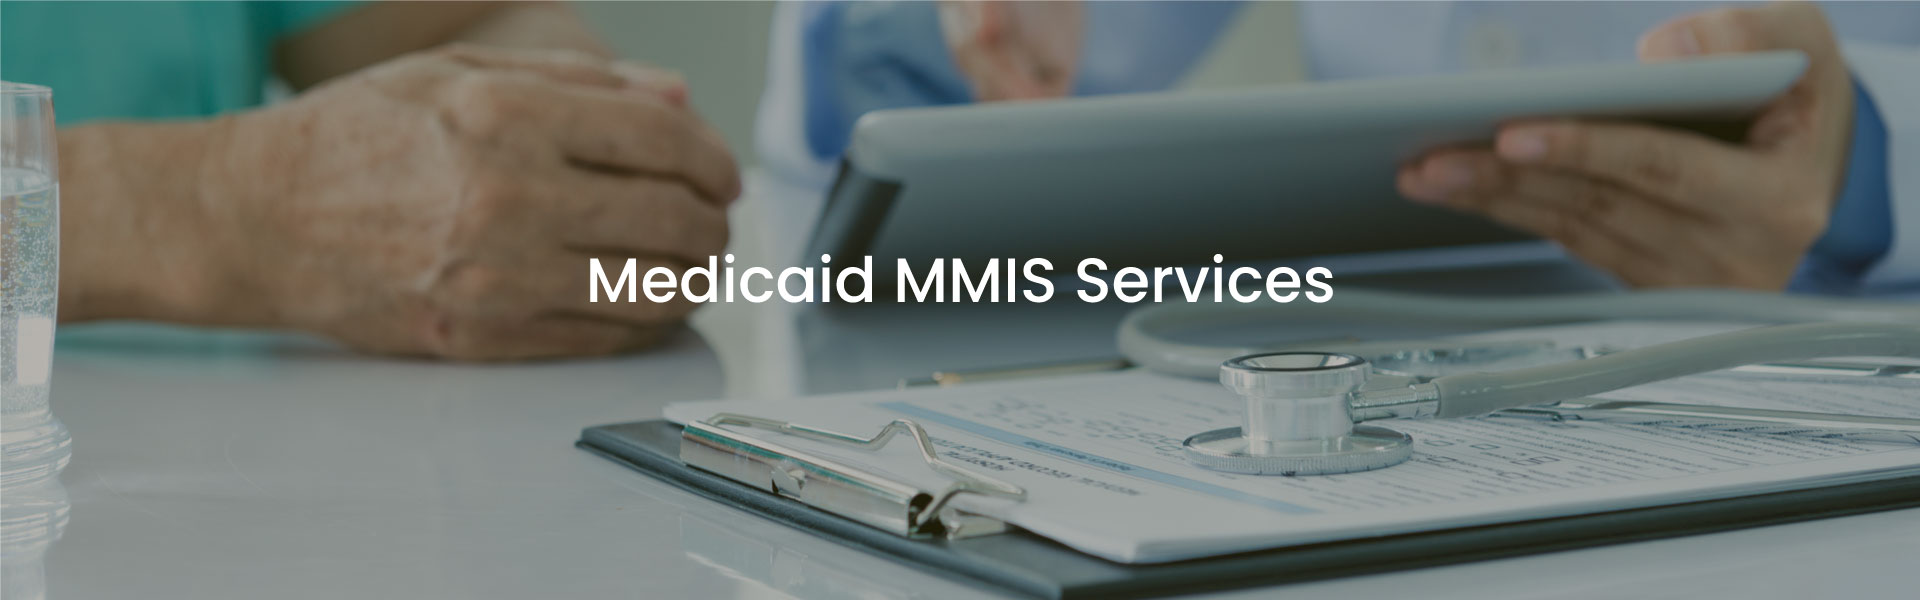 4 Trends that will Impact the Future of Medicaid Technology